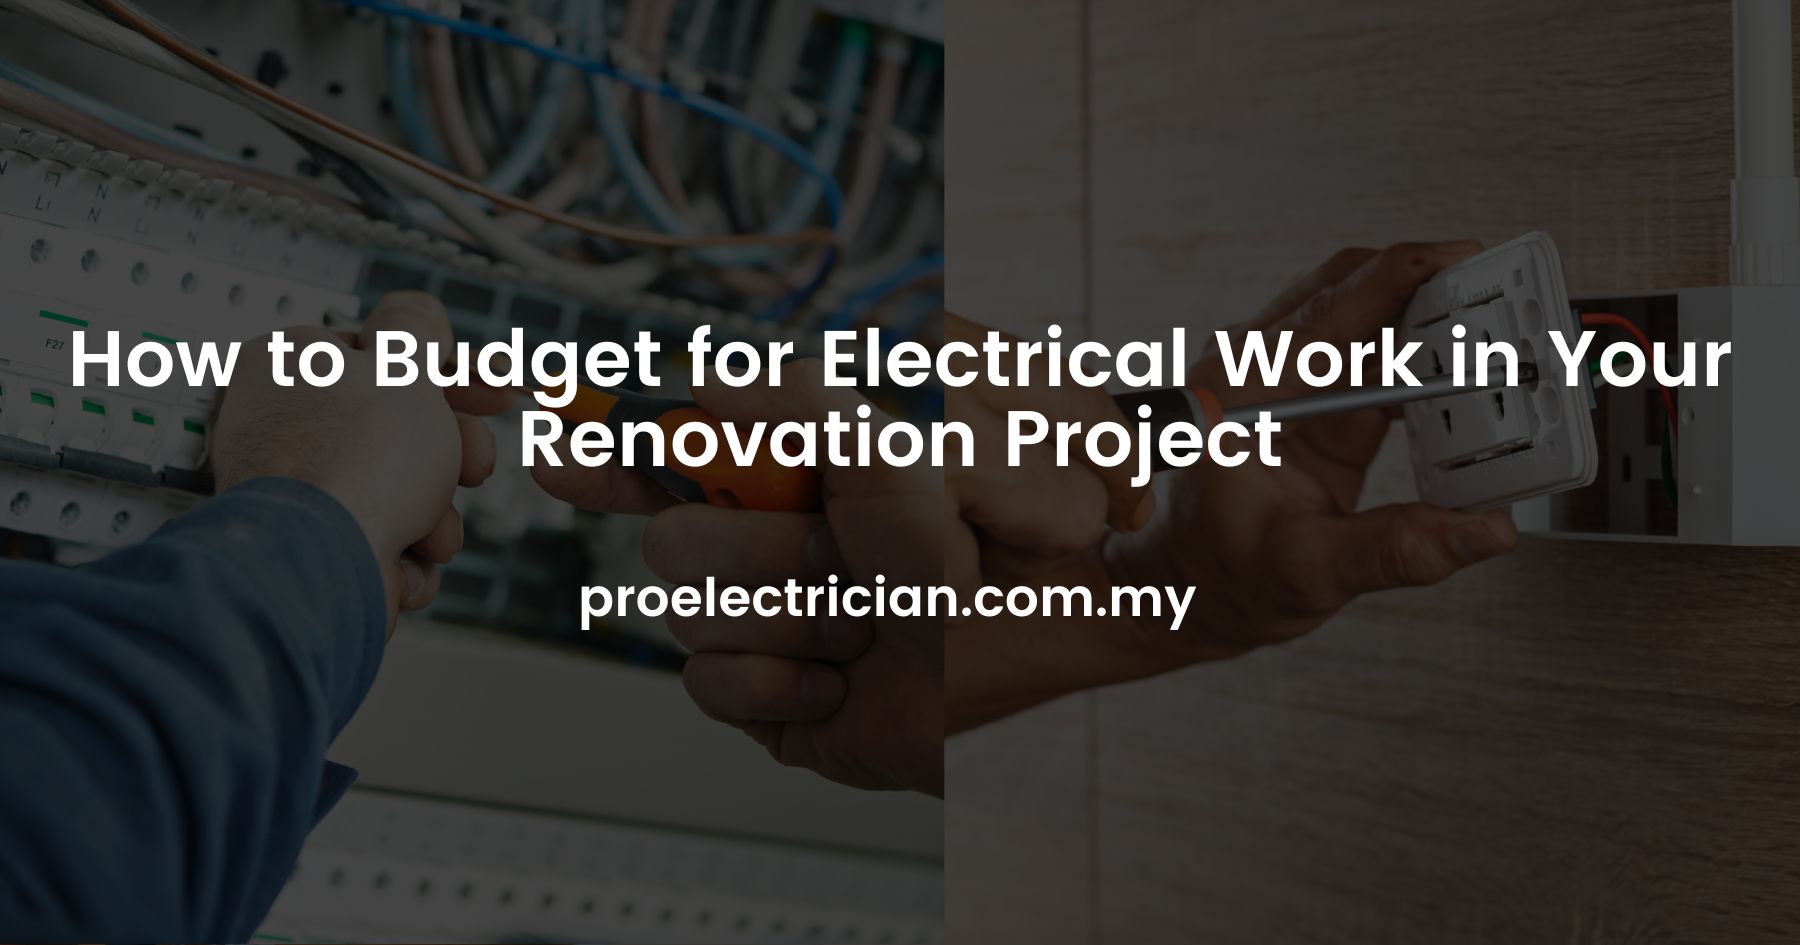 How to Budget for Electrical Work in Your Renovation Project